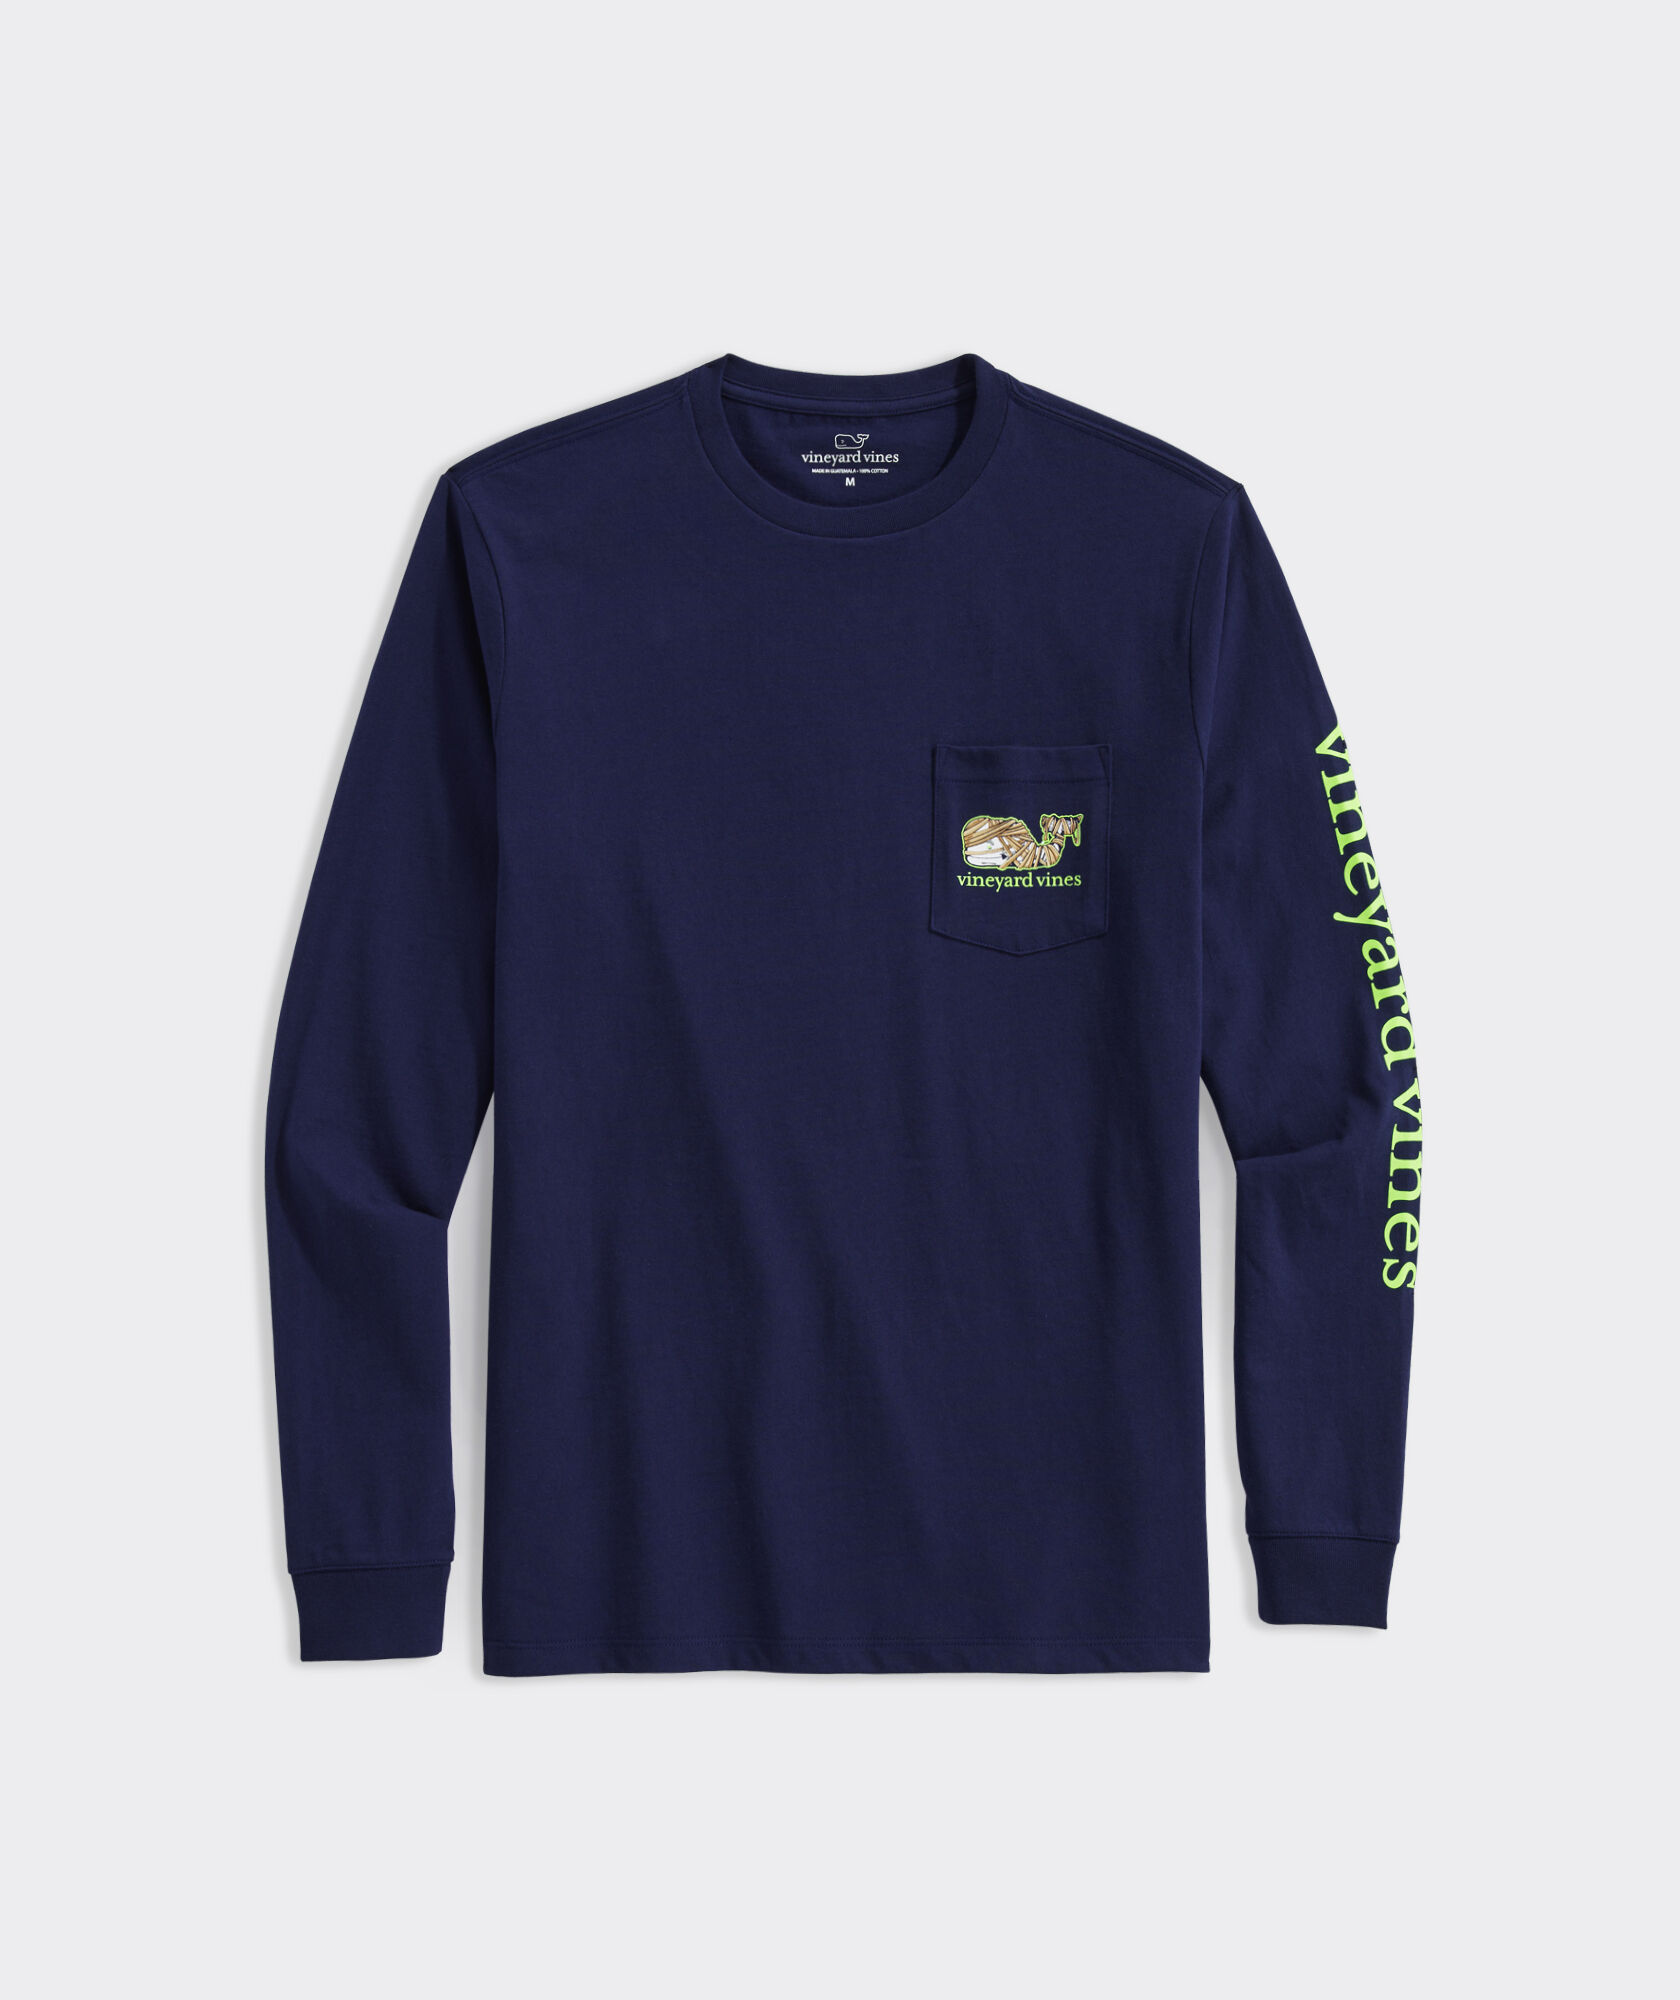 Shop Glow-In-The-Dark Mummy Whale Long-Sleeve Pocket Tee at